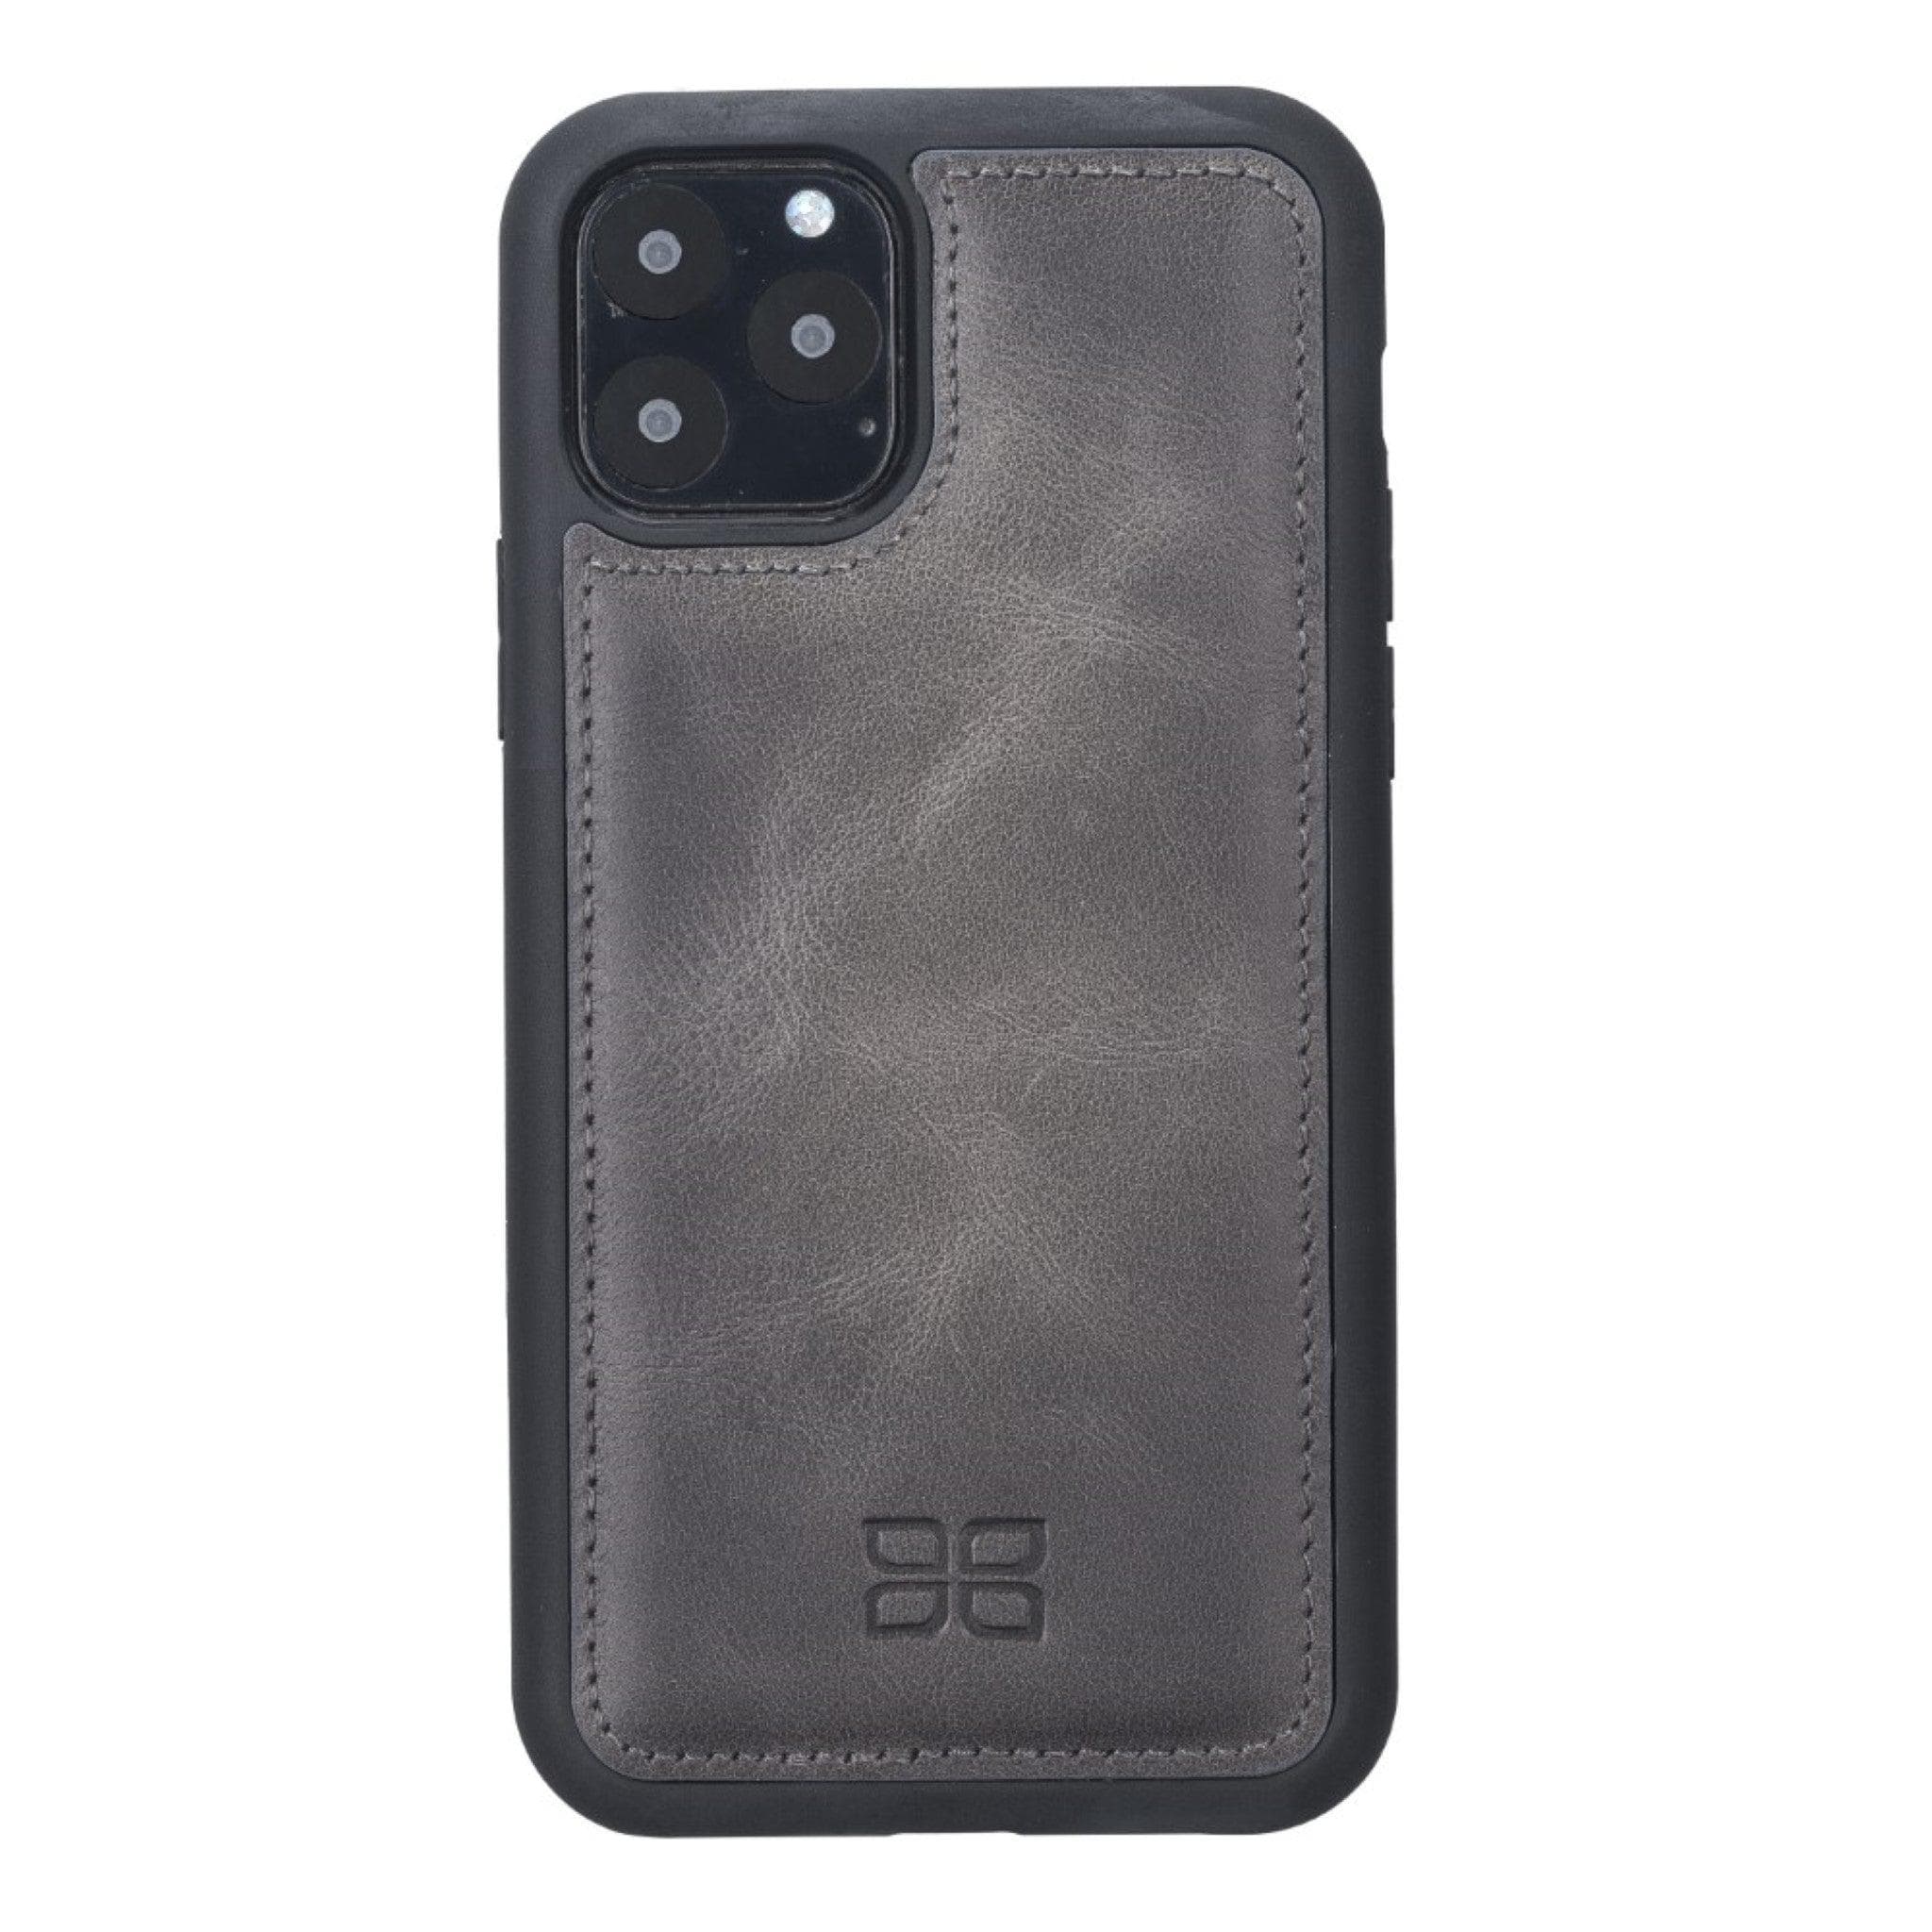 Flex Cover Leather Back Cover Case for Apple iPhone 11 Series iPhone 11 Pro / Tiguan Gray Bouletta LTD